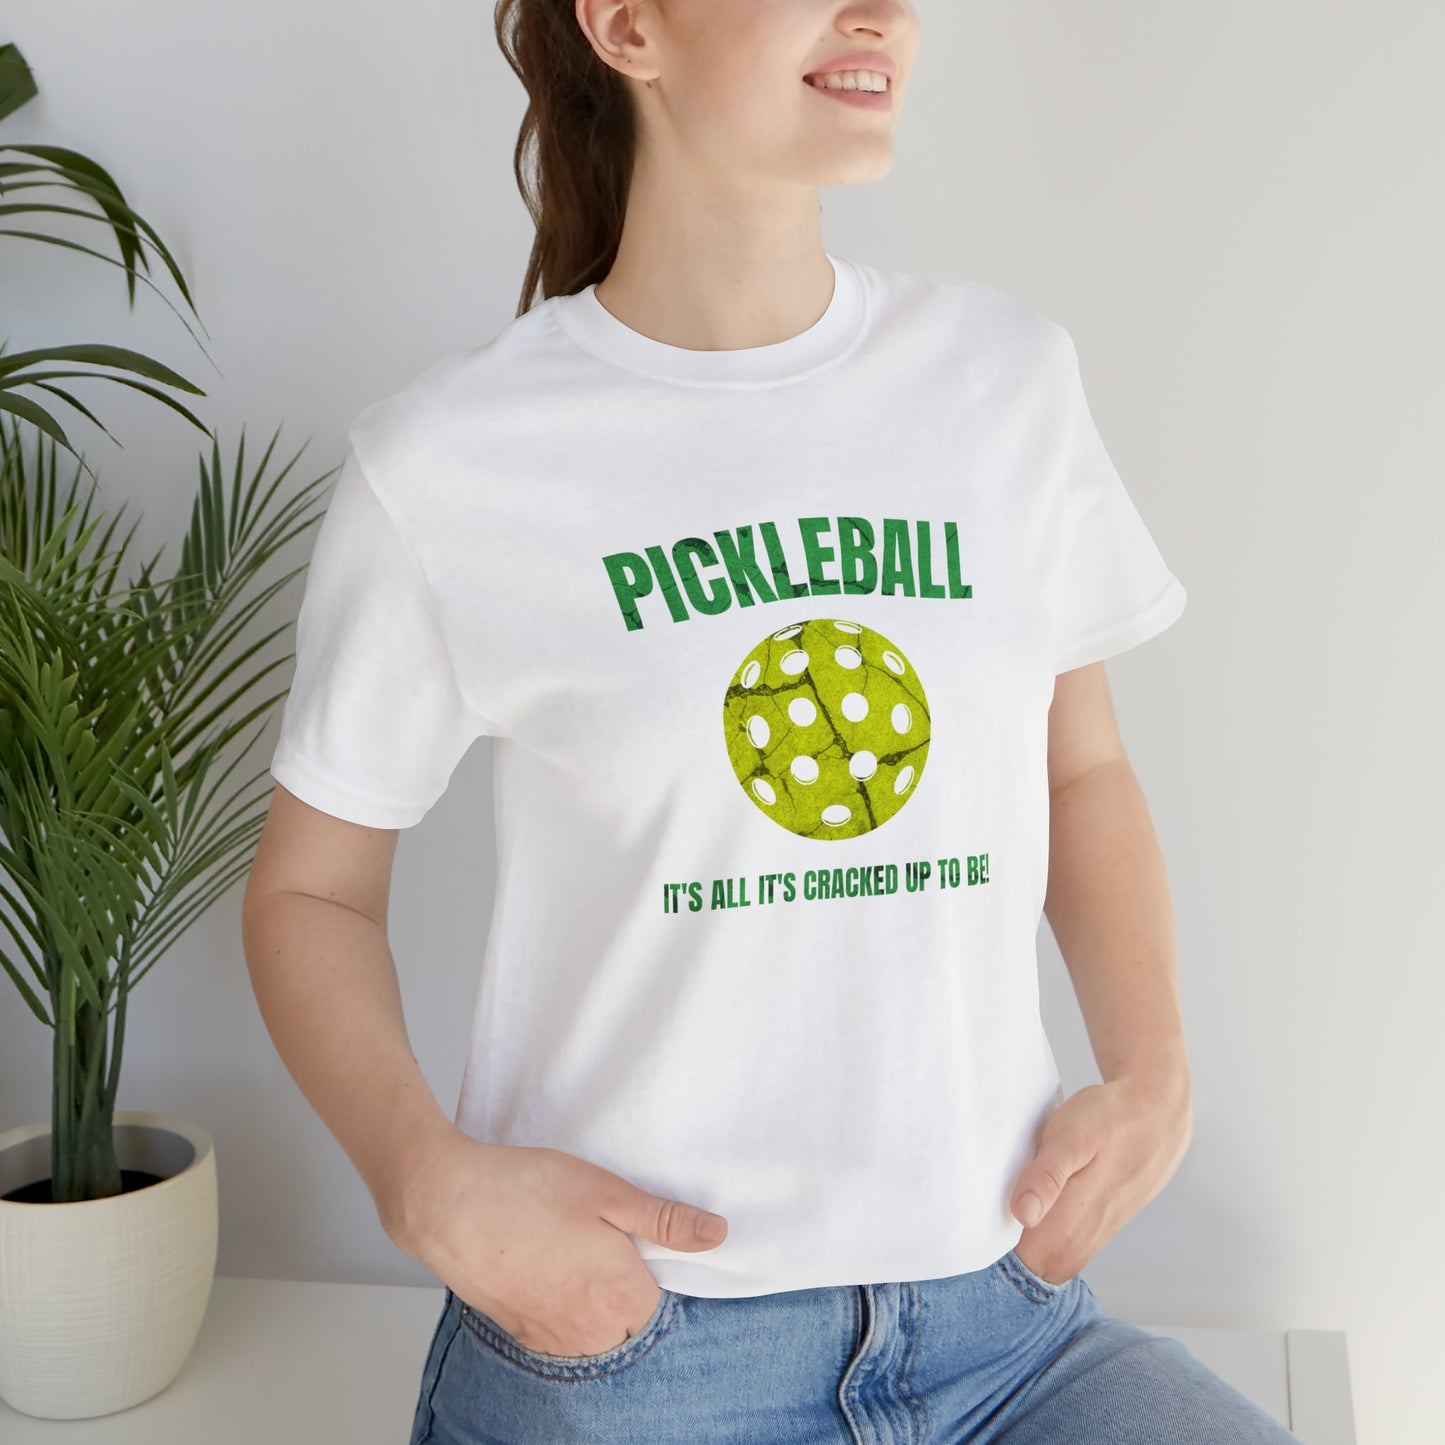 Pickleball, It's All It's Cracked Up To Be' - T-Shirt